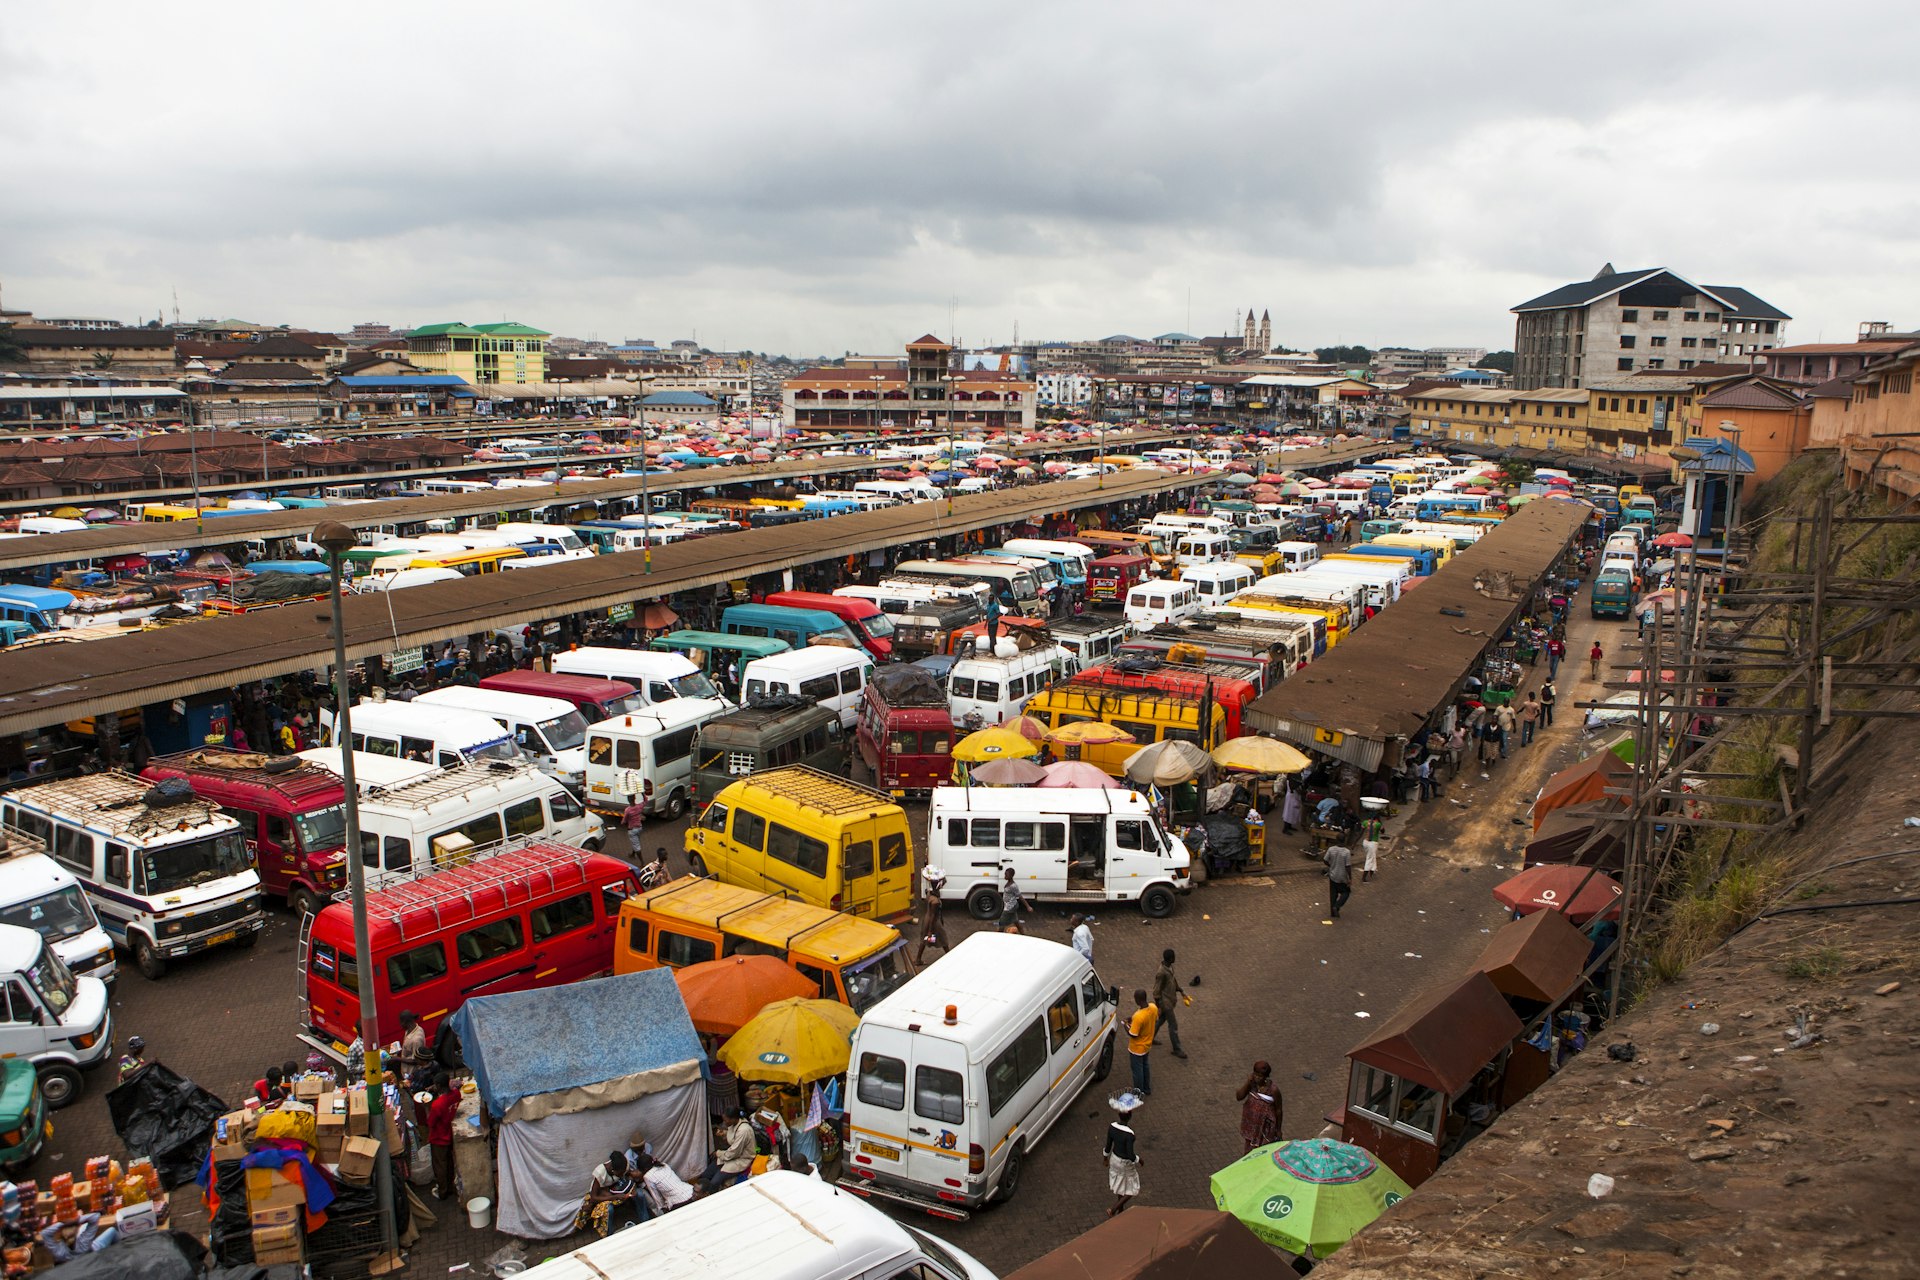 An aerial view of the bus station at Kumasi, Ghana, showing intercity “tro-tro” minbuses